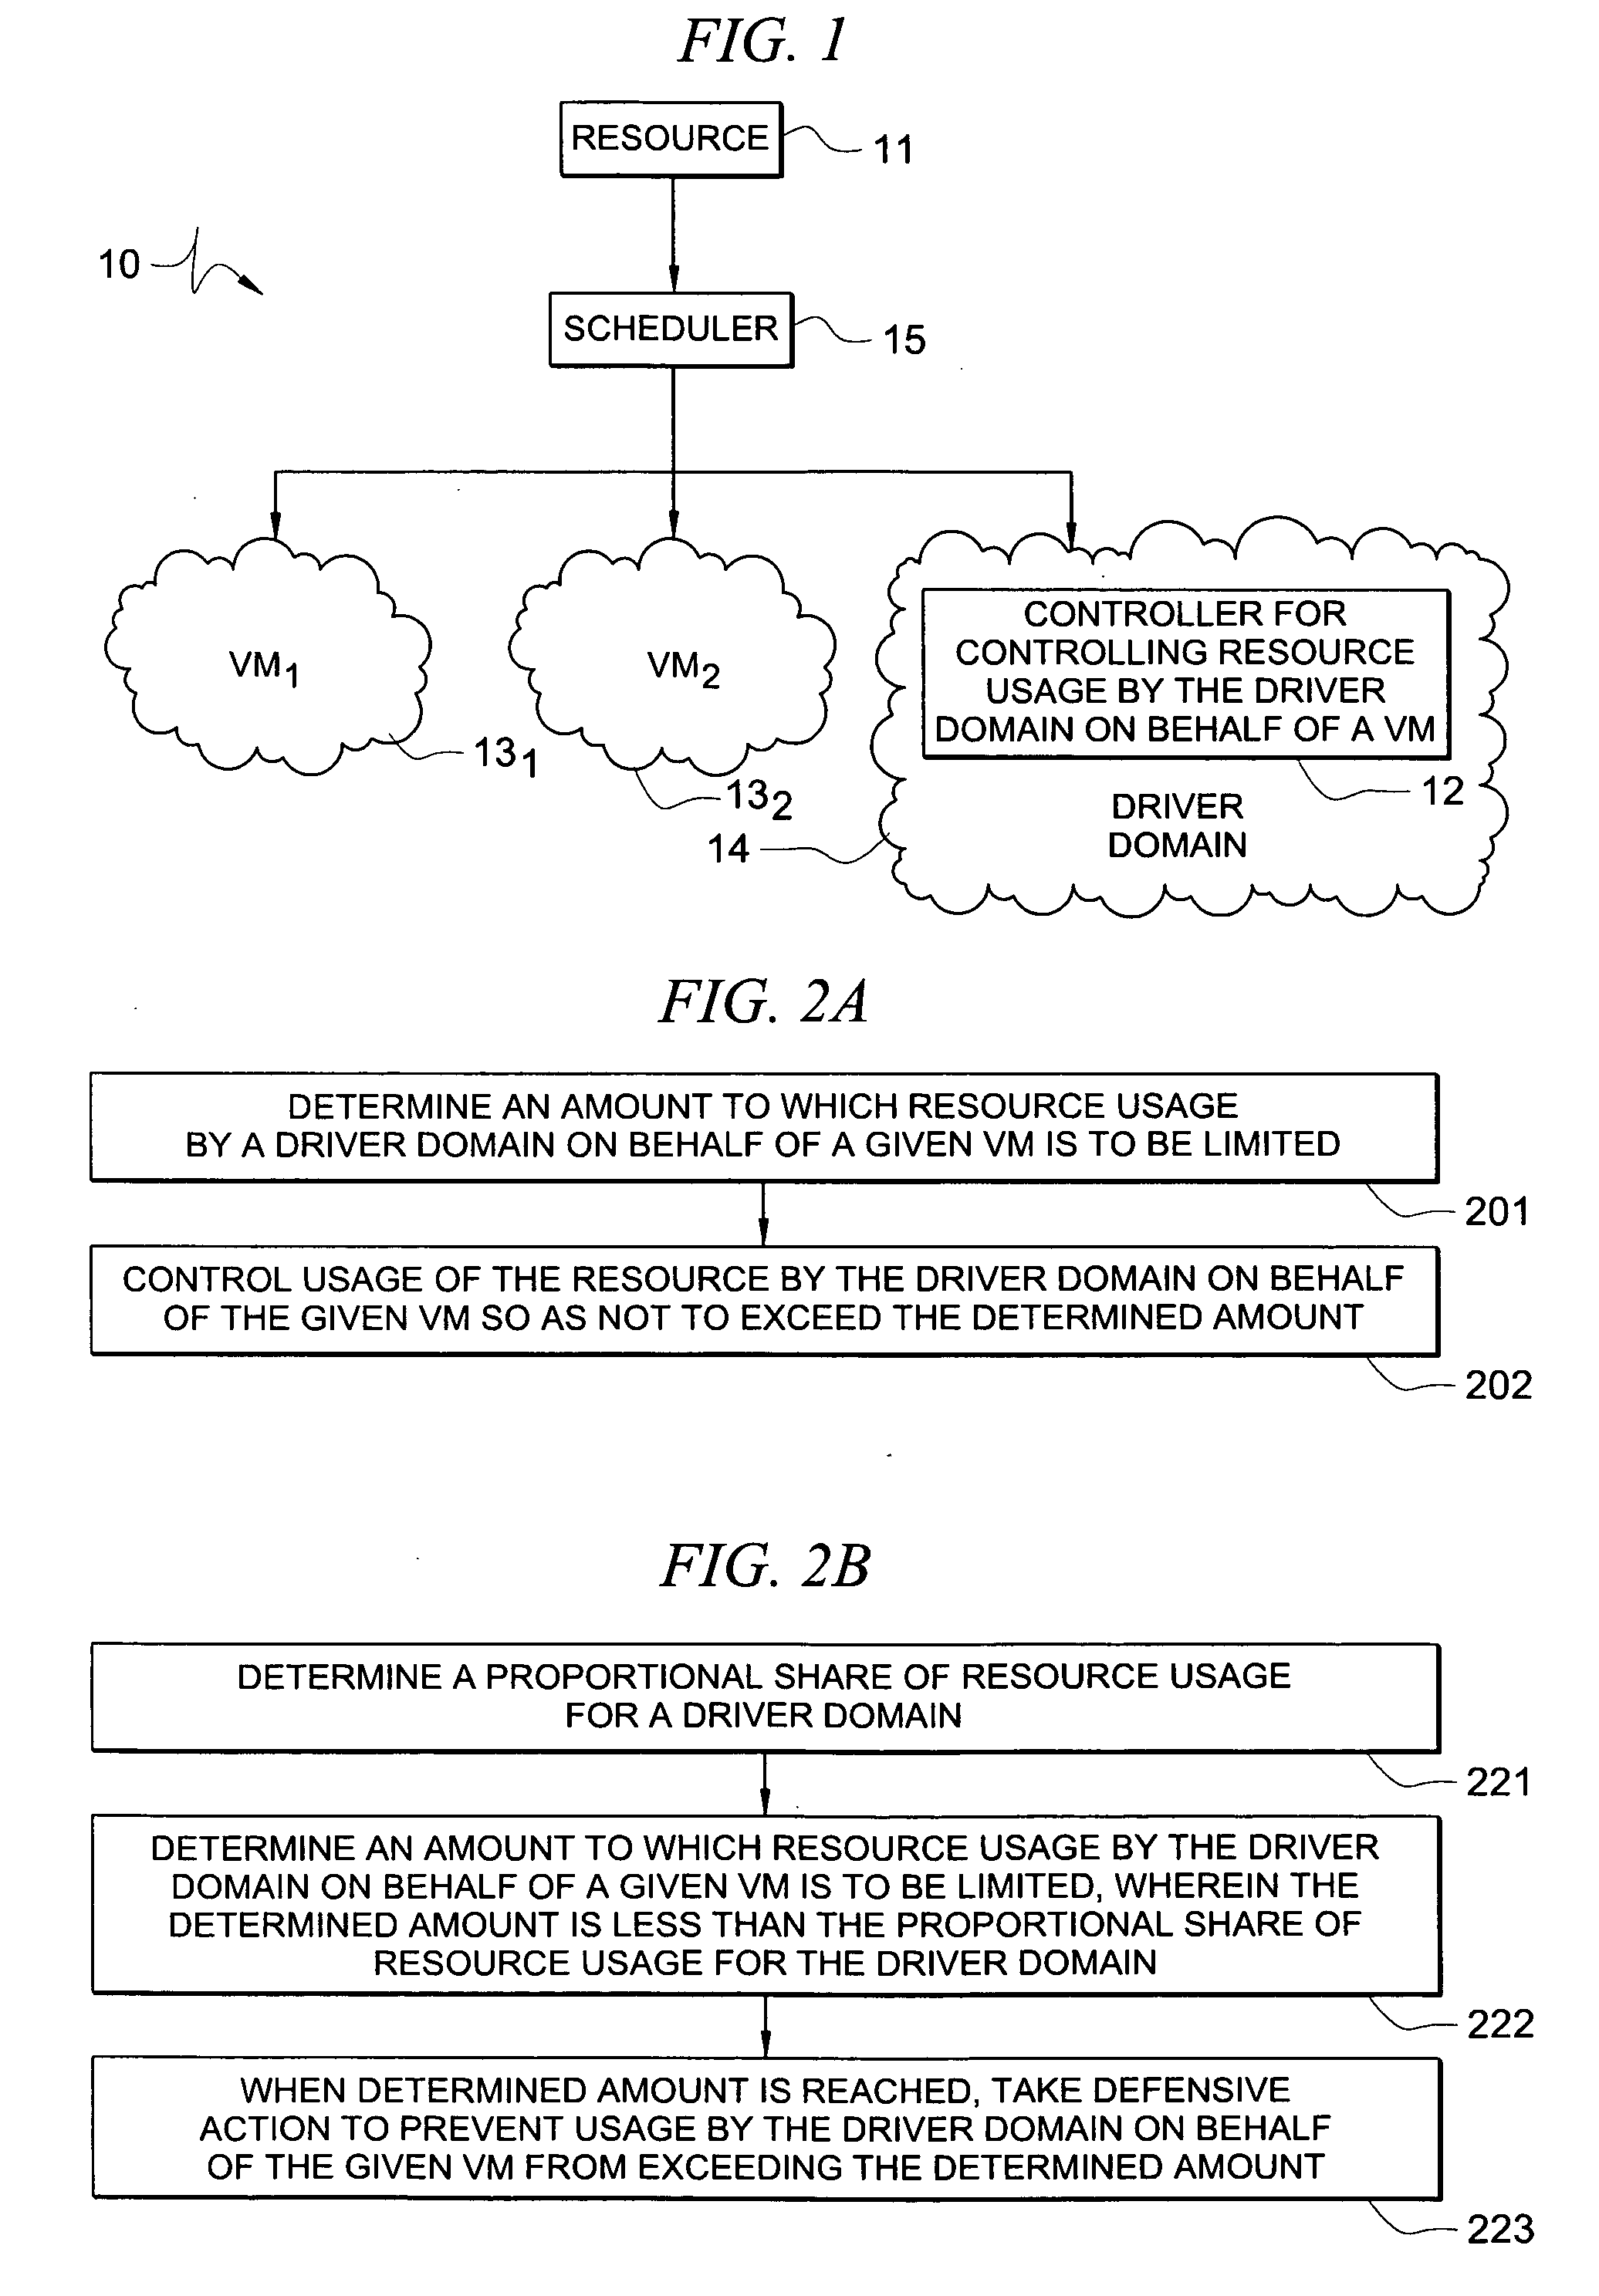 Systems and methods for controlling resource usage by a driver domain on behalf of a virtual machine